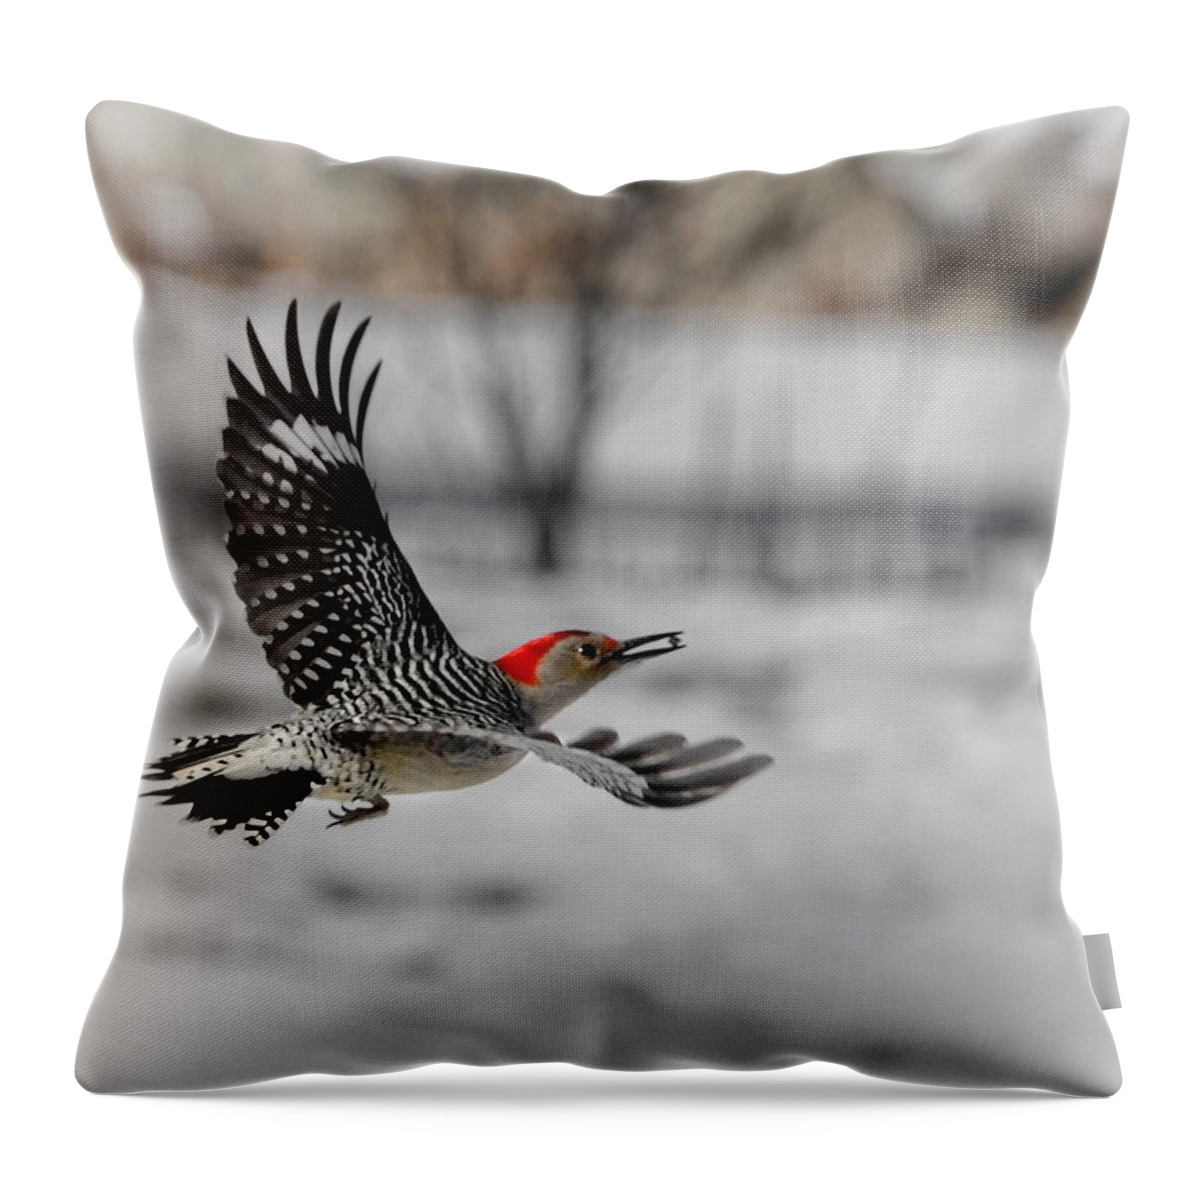 Red Bellied Woodpecker Throw Pillow featuring the photograph Red Bellied Woodpecker by Bill Wakeley